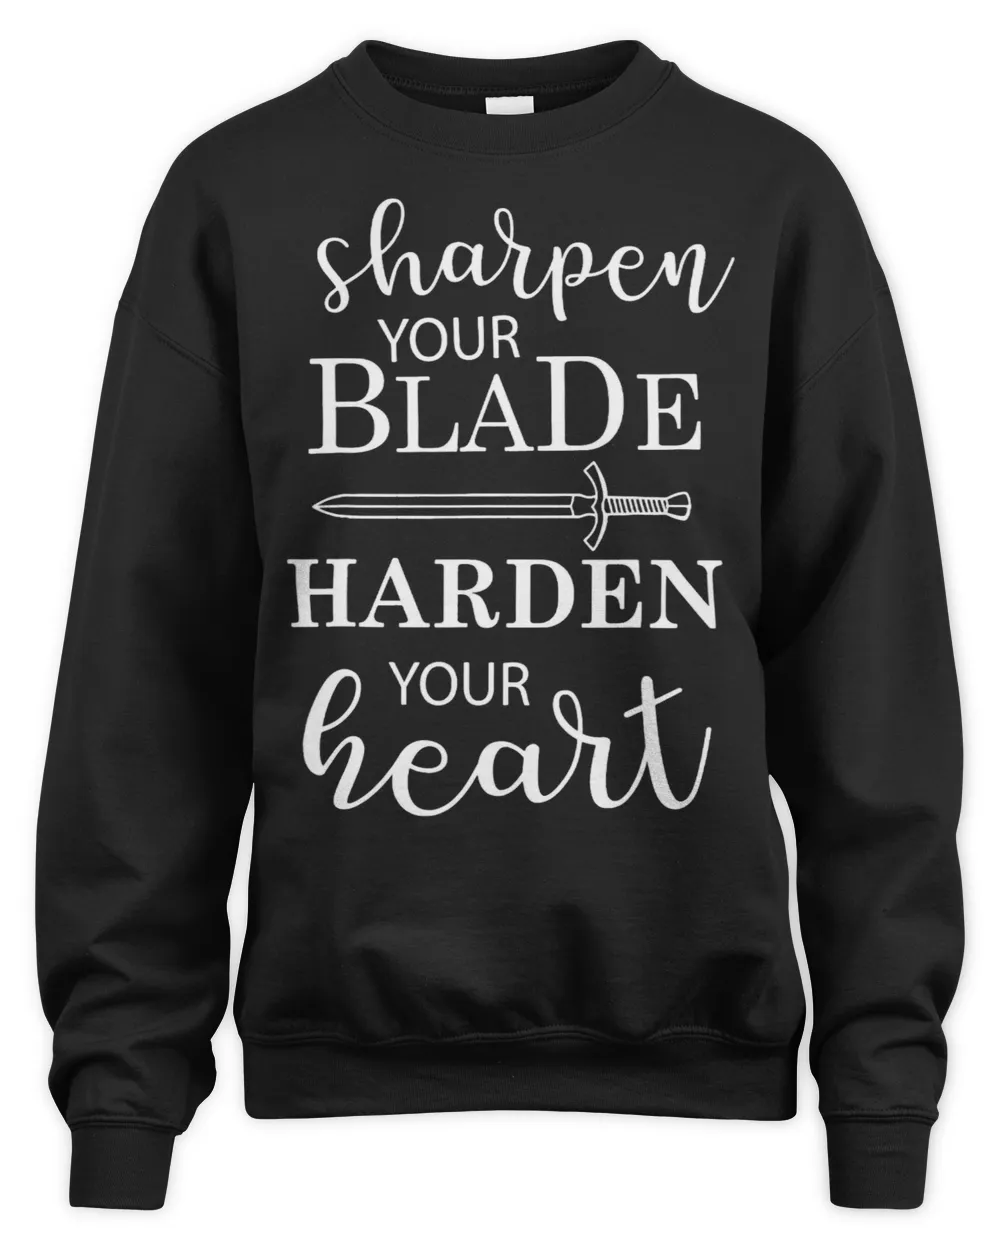 The Cruel Prince Sharpen your blade Harden your heart